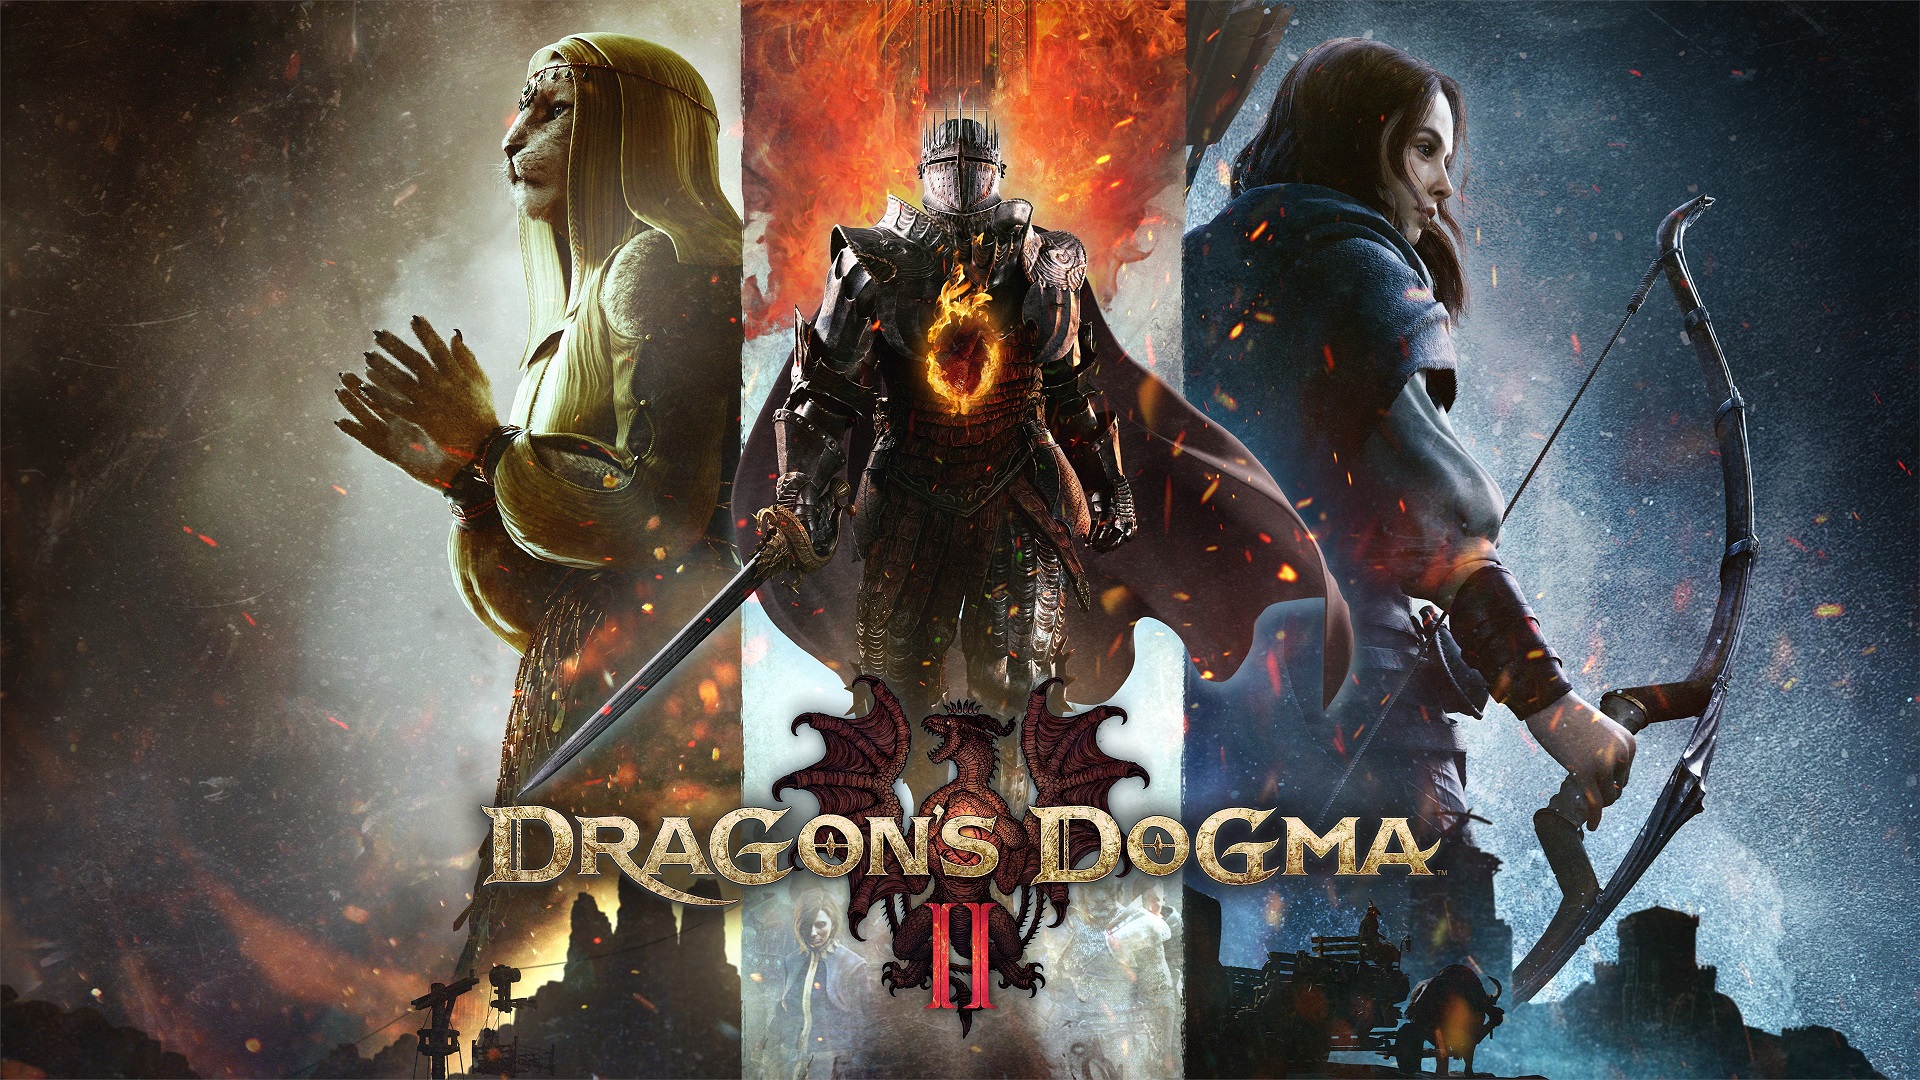 Dragons Dogma 2 fully revealed with debut trailer, info, release platforms